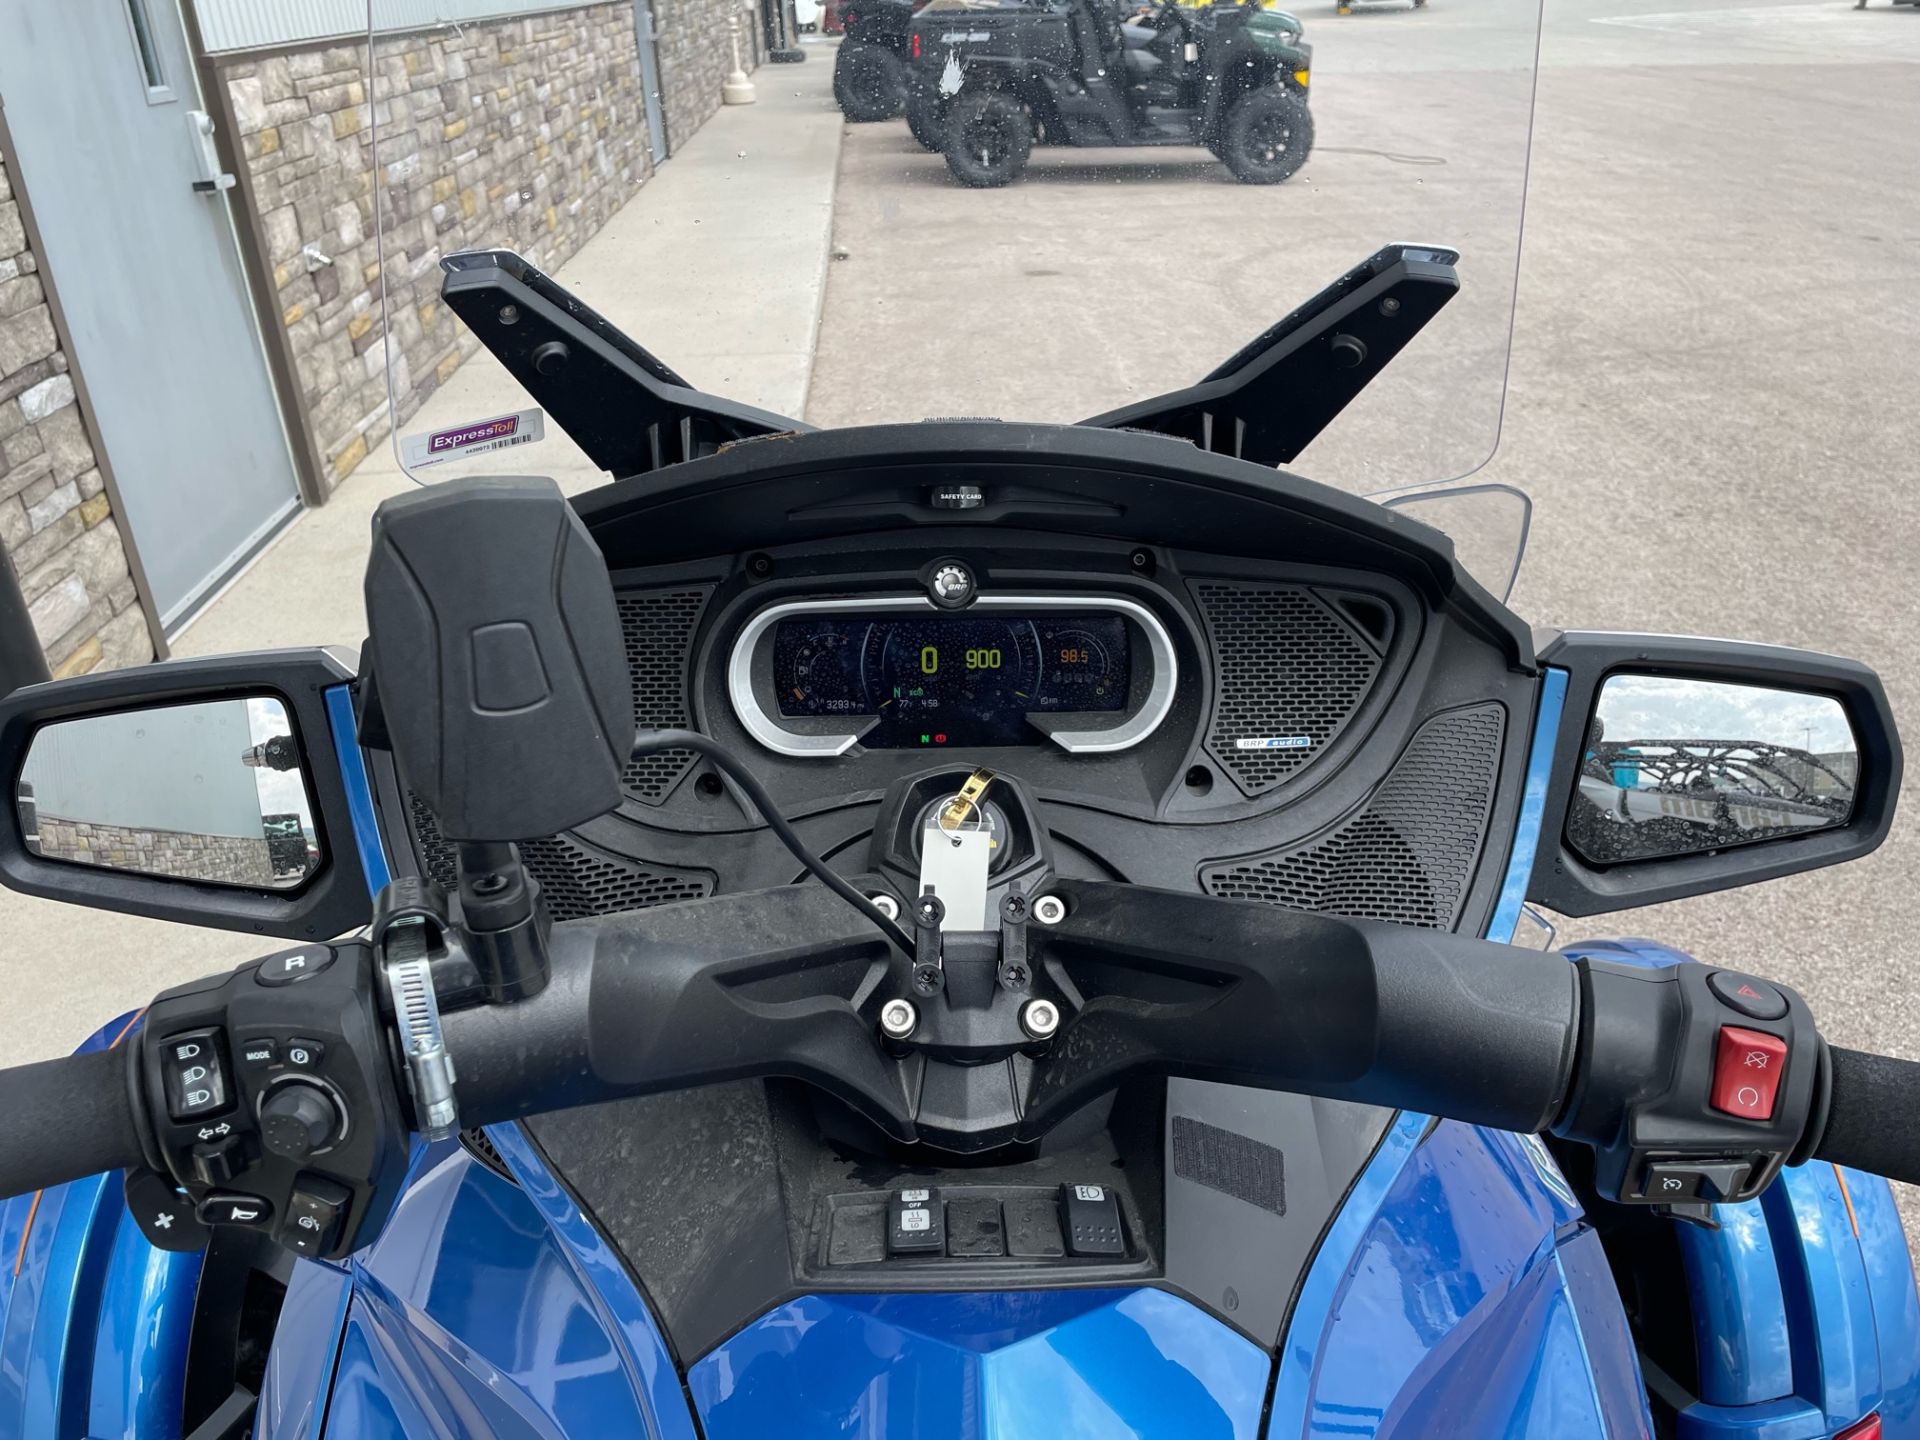 2018 Can-Am Spyder RT Limited in Rapid City, South Dakota - Photo 11